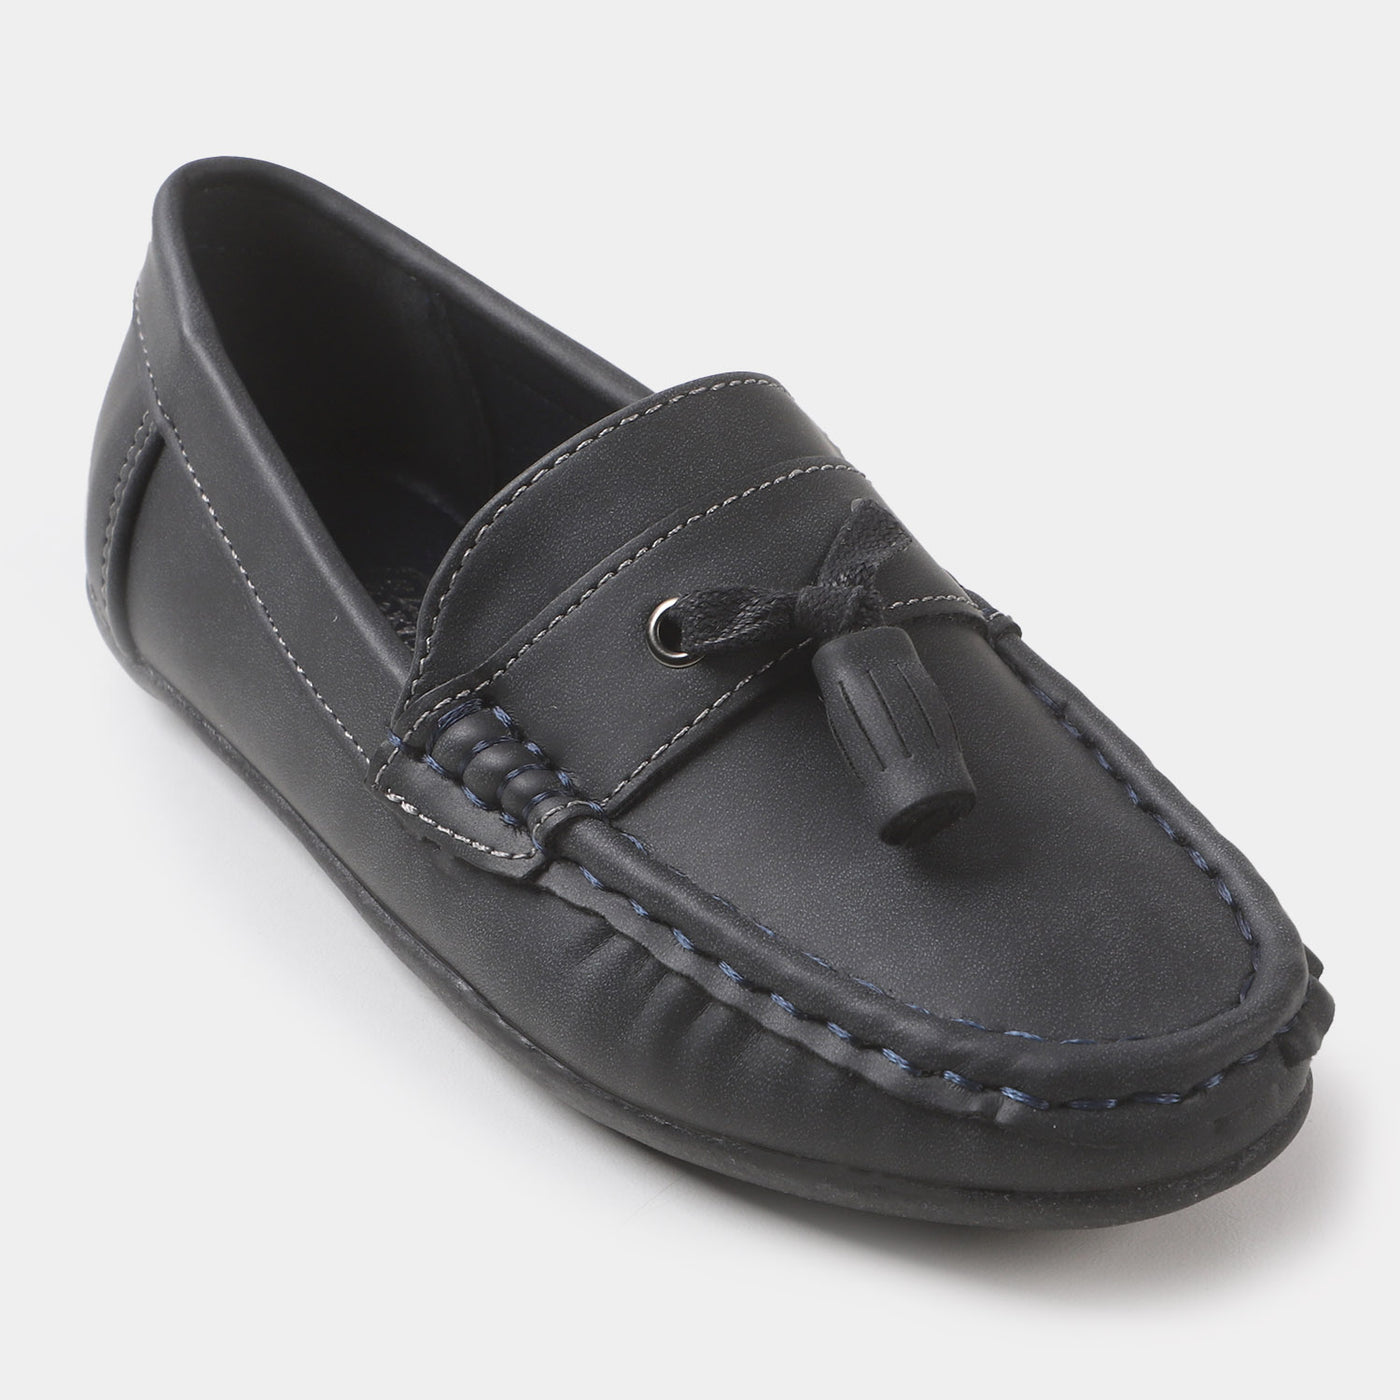 Boys loafers 202109-4 - NAVY